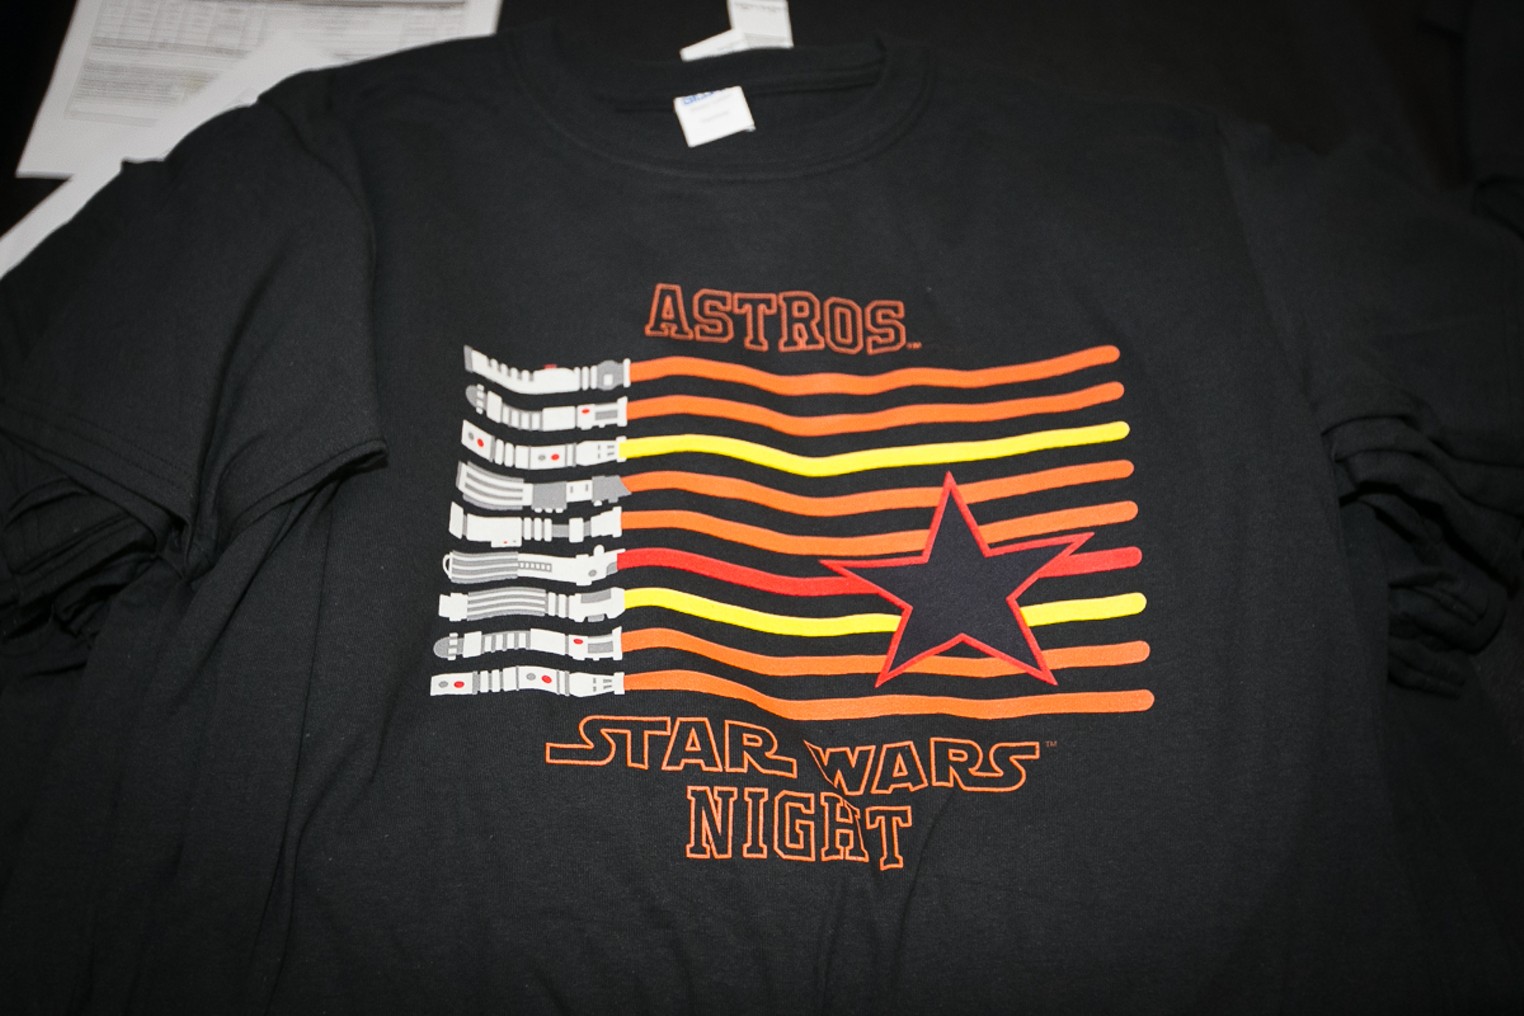 Star Wars Night With the Astros